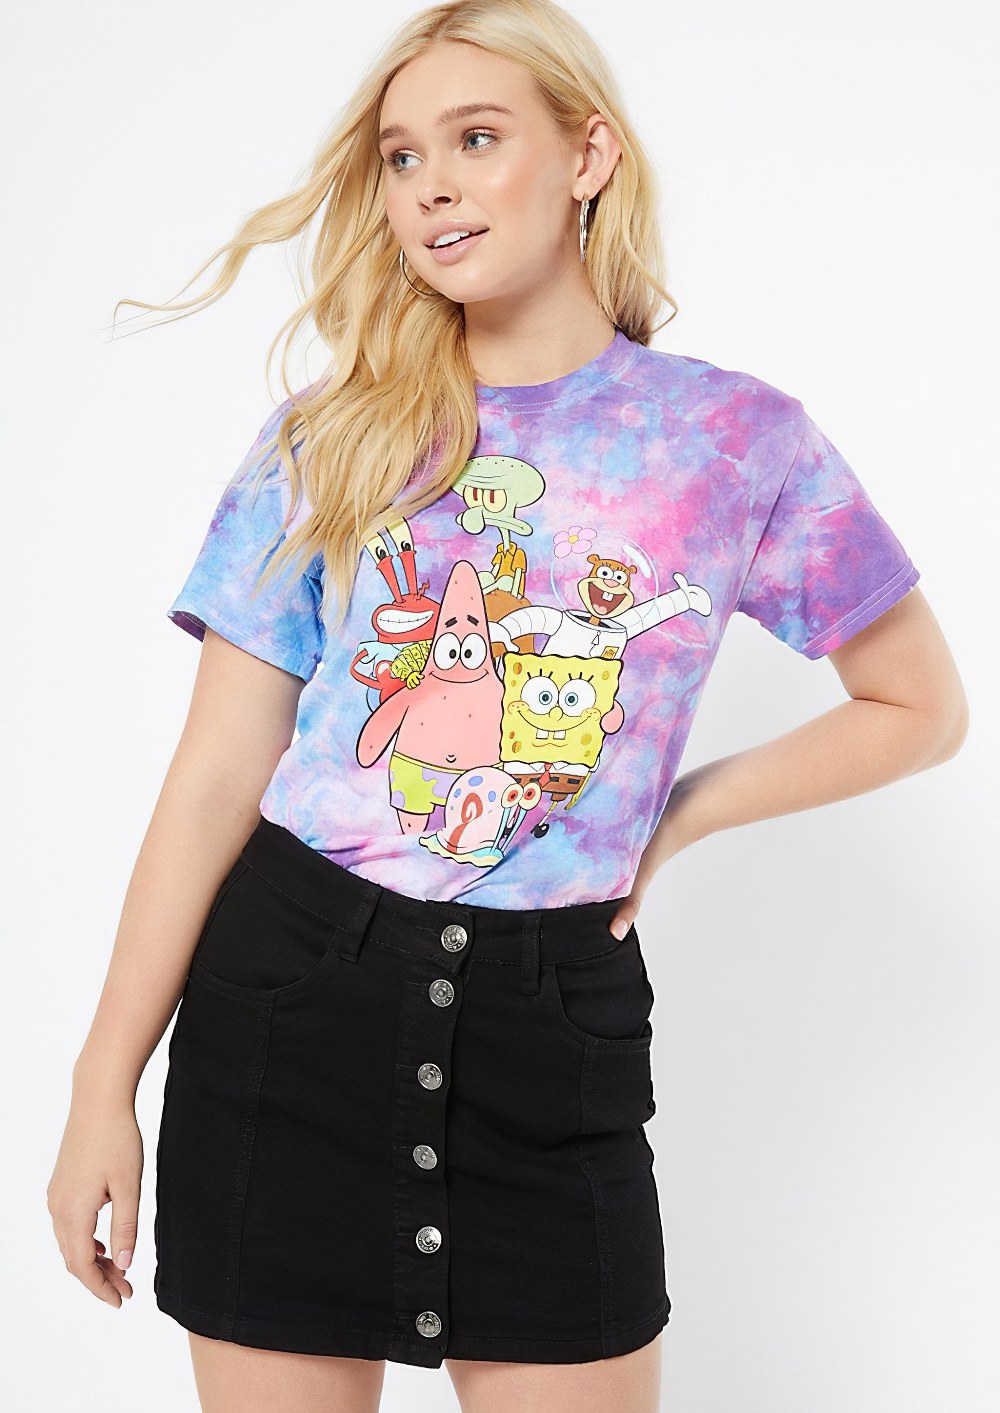 Gangster Spongebob With Friend 3d Shirt Multi Color Full Size Up To 5xl